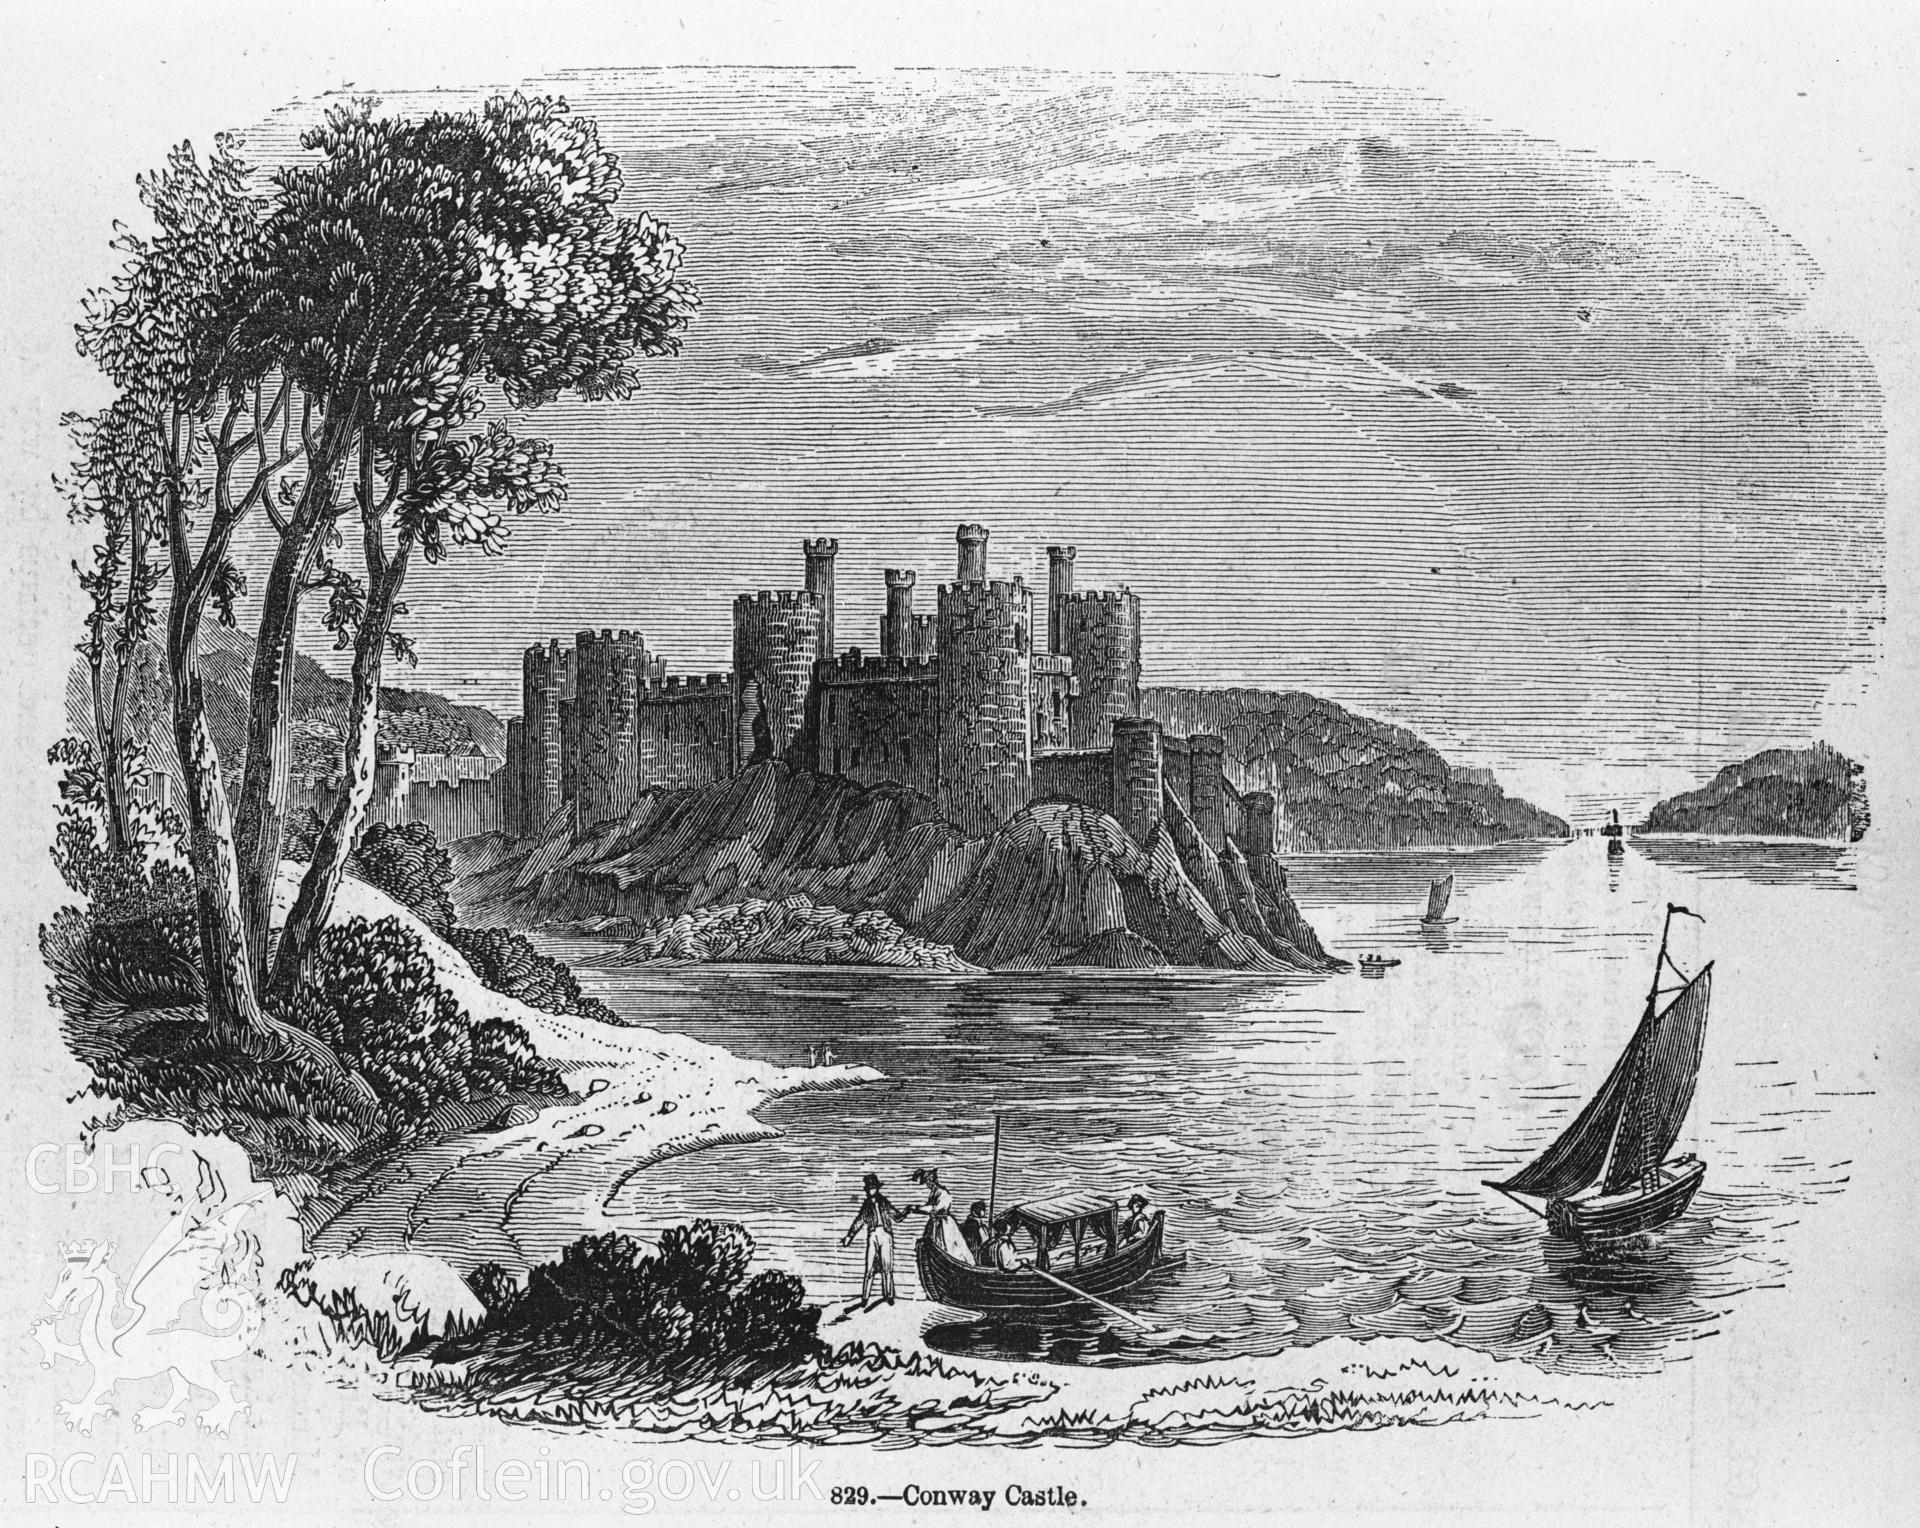 2 b/w prints - photographs of engraving showing view of Conwy castle (taken from 'Old England' p. 209, fig. 829), collated by the former Central Office of Information.